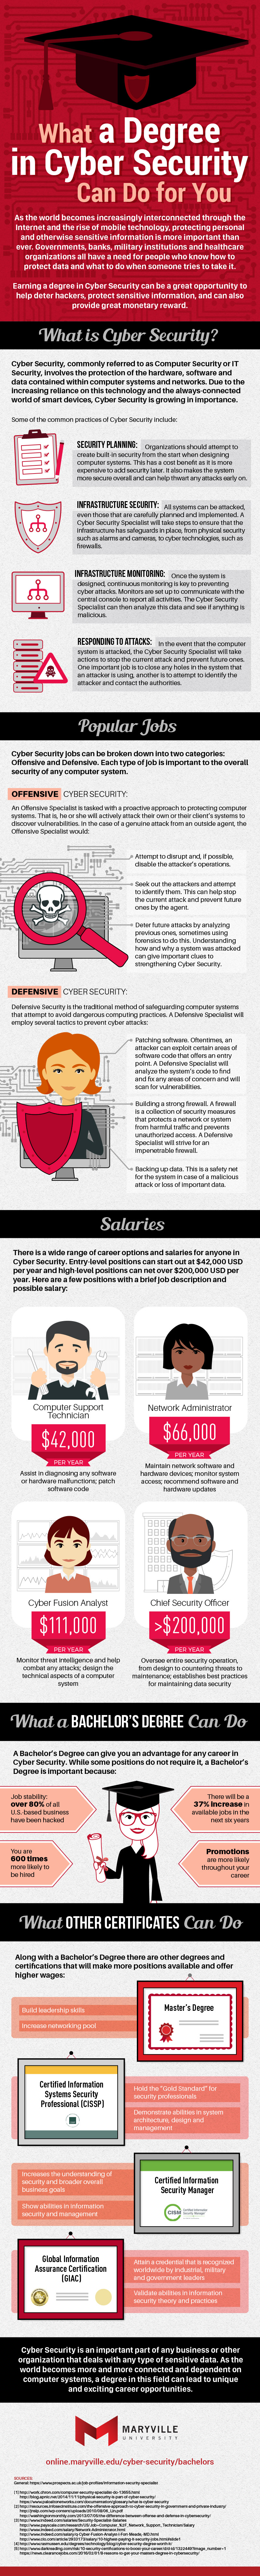 How a Degree in Cyber Security Opens Up Amazing Career Opportunities - Infographic